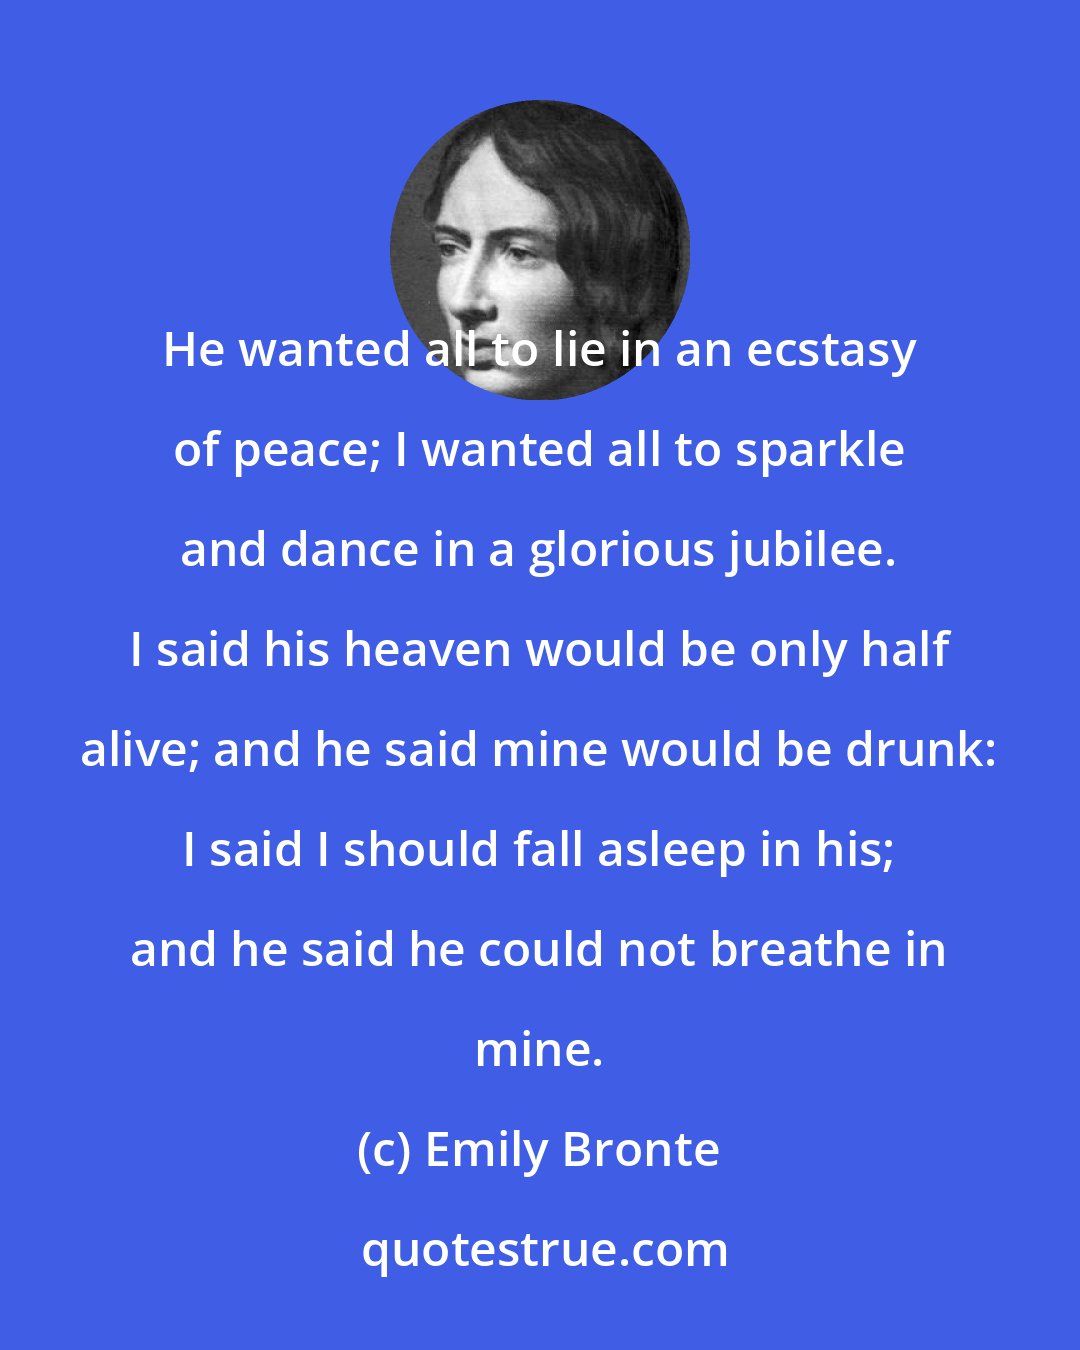 Emily Bronte: He wanted all to lie in an ecstasy of peace; I wanted all to sparkle and dance in a glorious jubilee. I said his heaven would be only half alive; and he said mine would be drunk: I said I should fall asleep in his; and he said he could not breathe in mine.